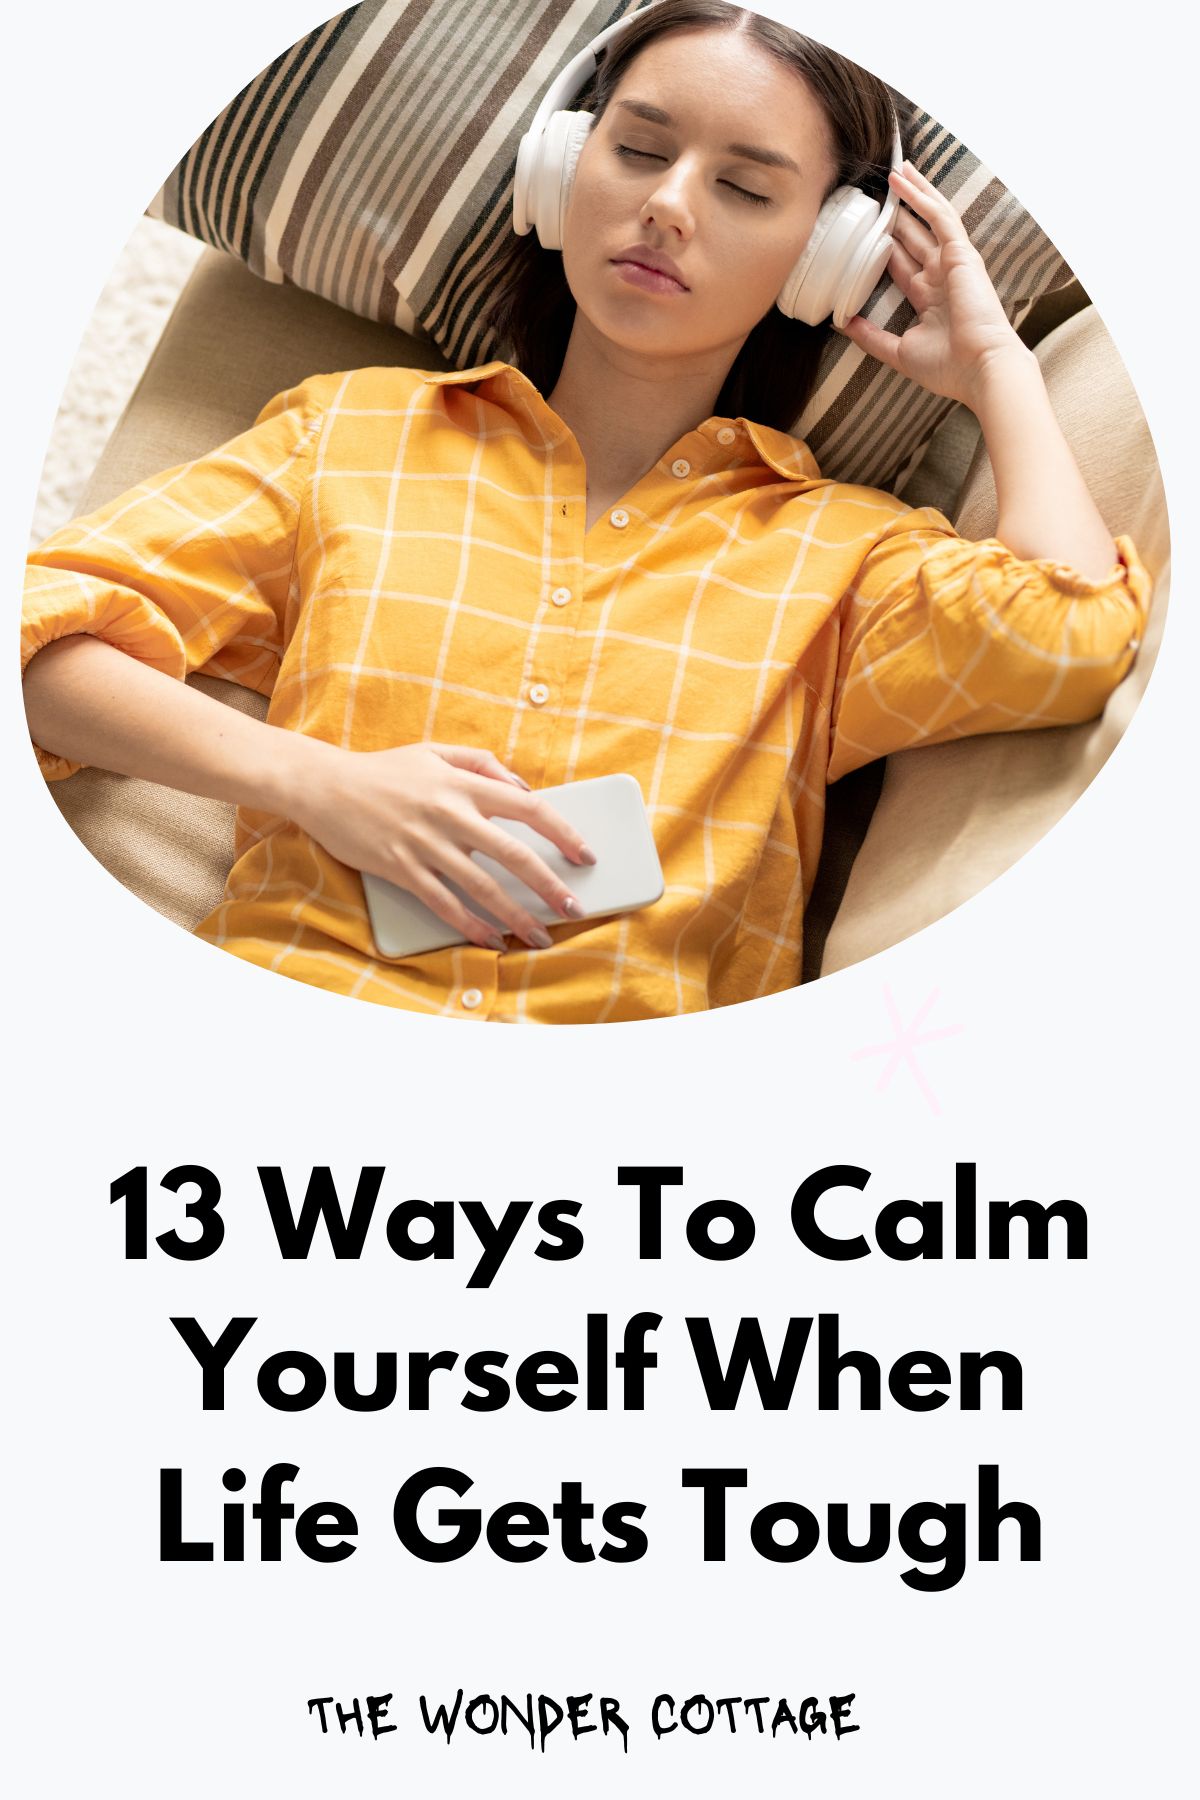 13 Ways To Calm Yourself When Life Gets Tough